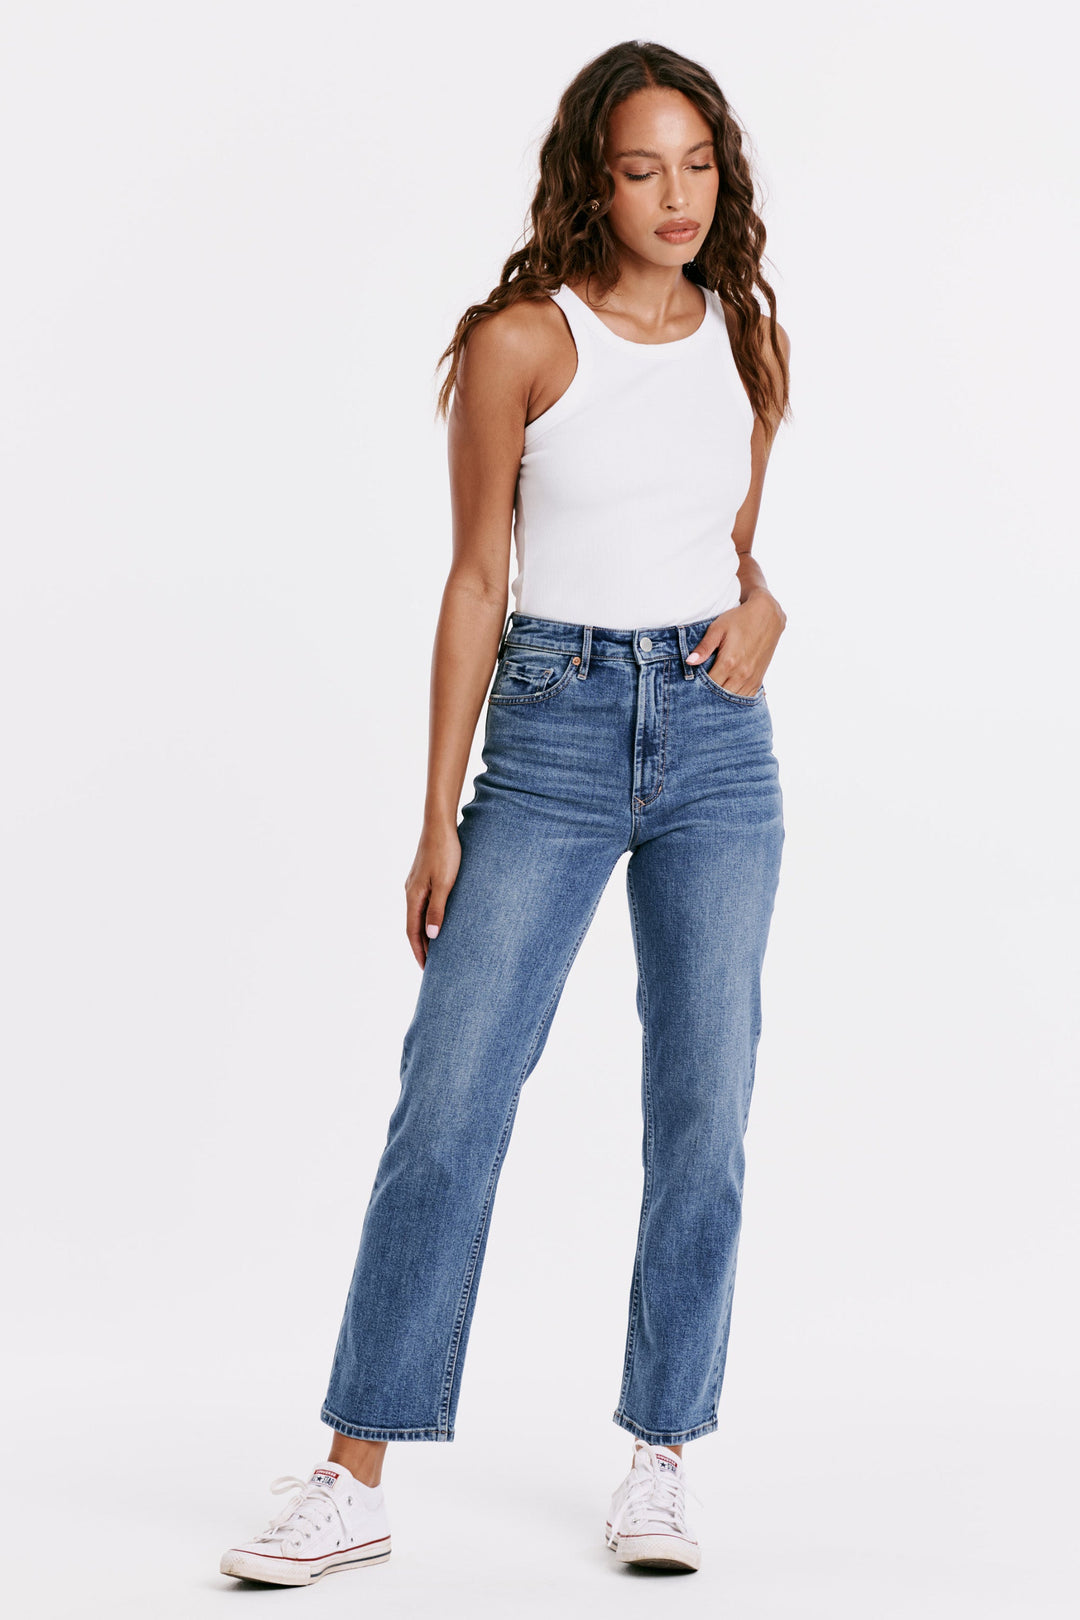 Midland High Rise Rigid Magic 90's Distressed Straight Jeans in